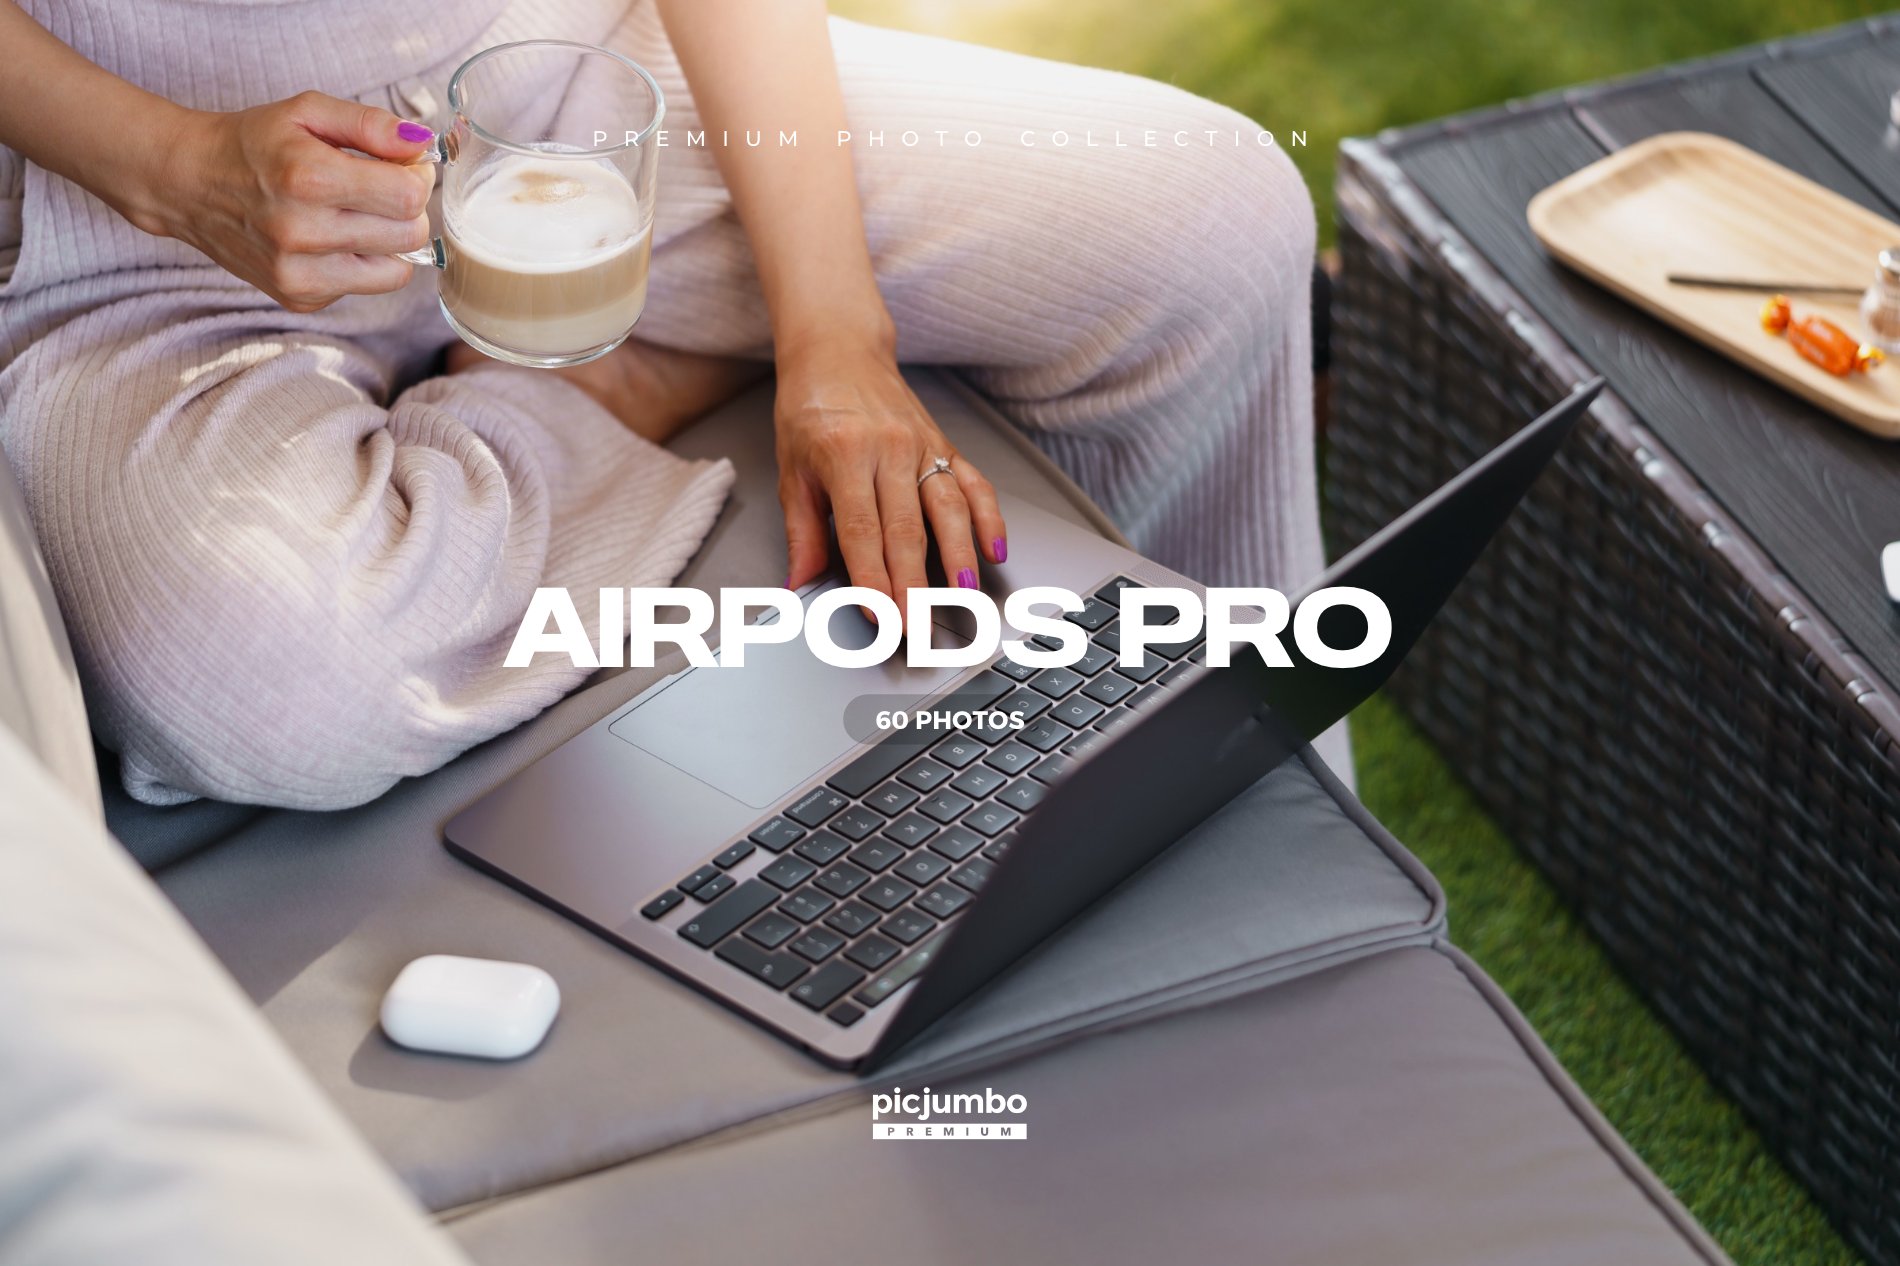 AirPods Pro Stock Photo Collection